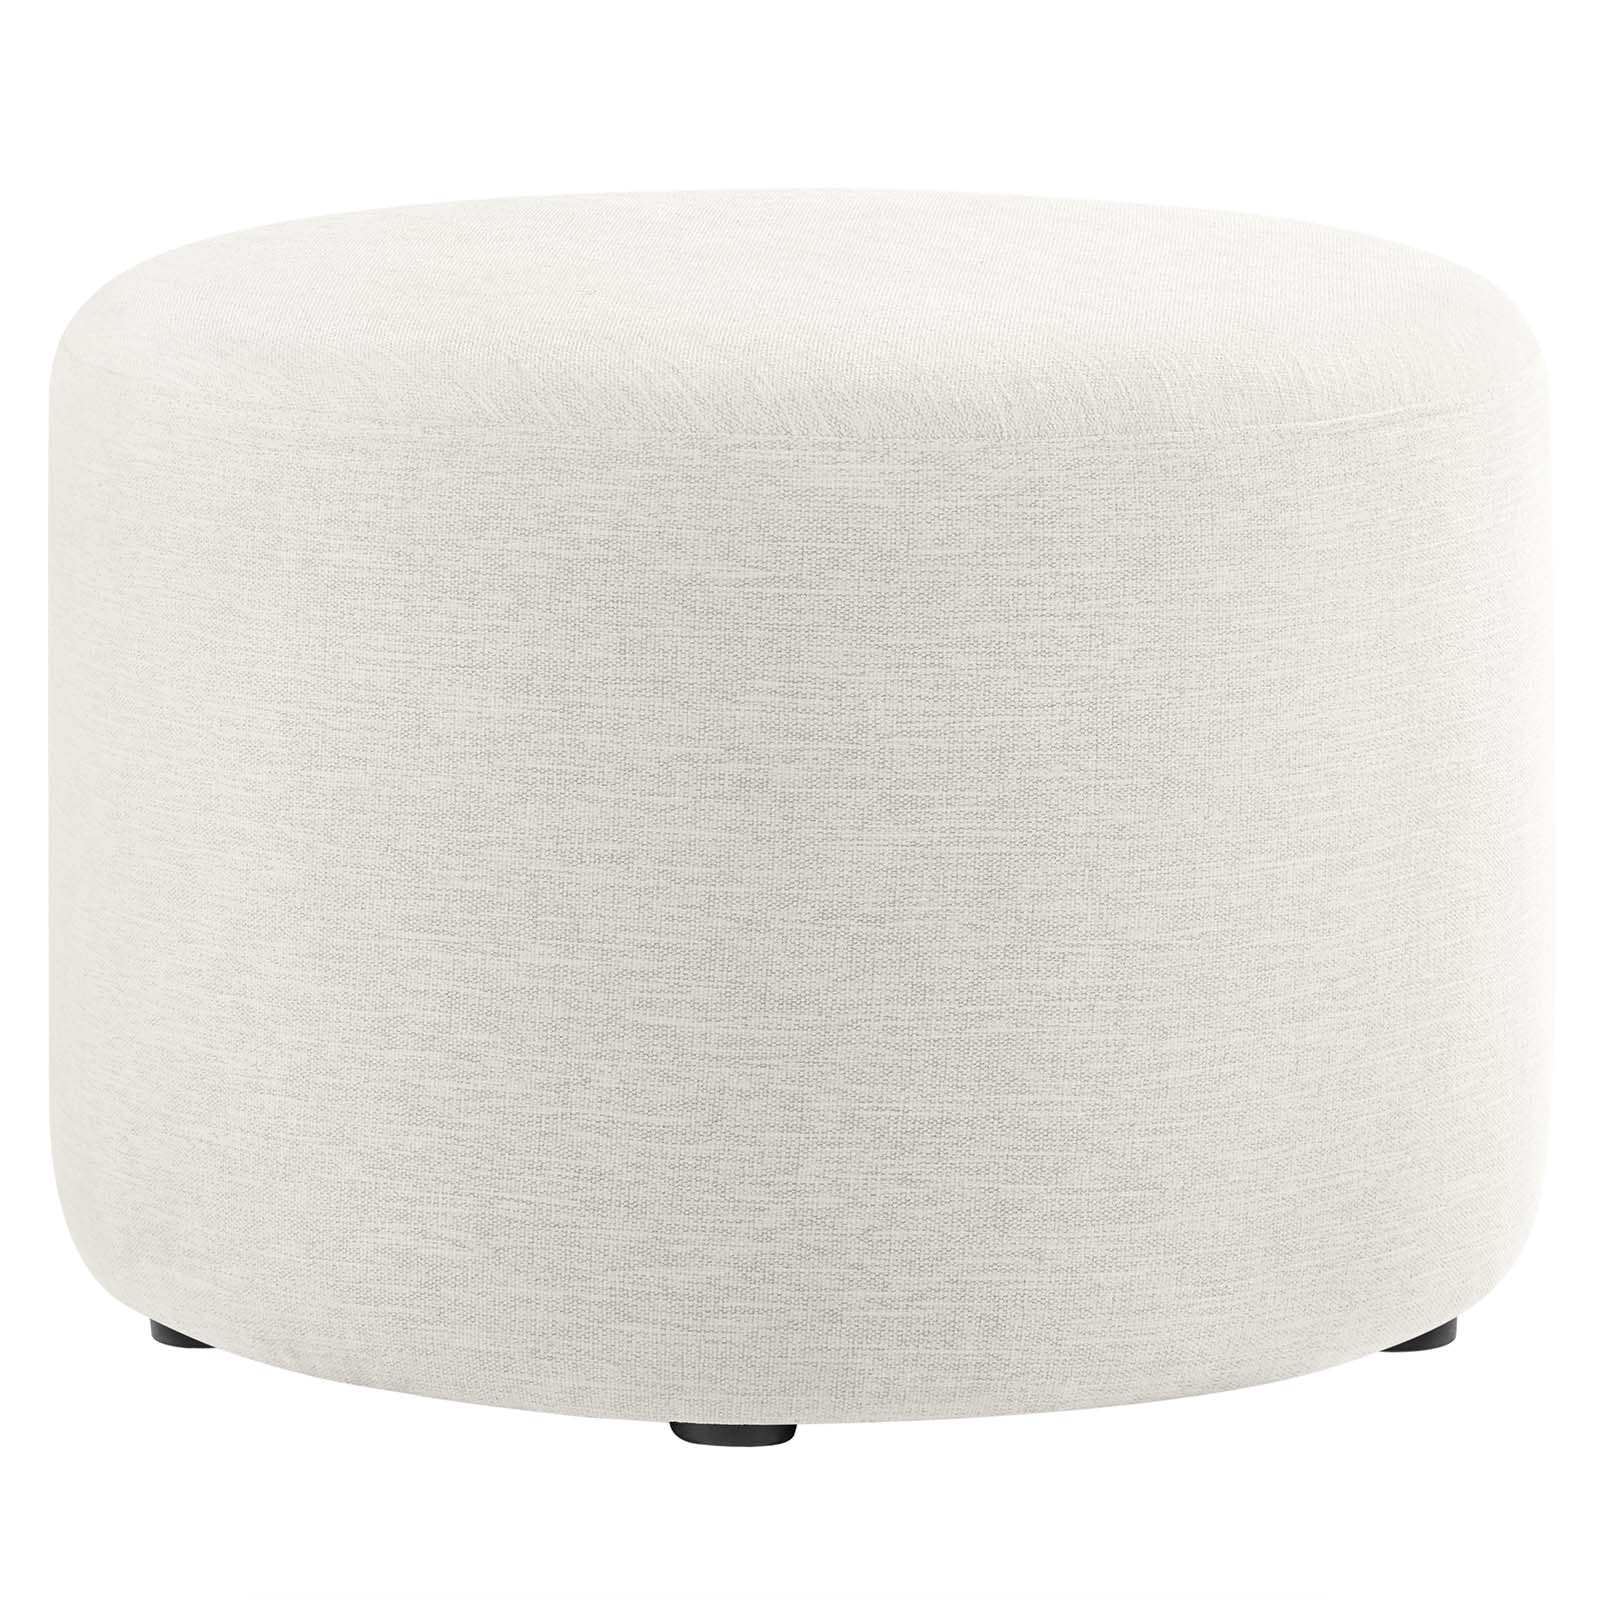 Callum Large 23" Round Woven Heathered Fabric Upholstered Ottoman - East Shore Modern Home Furnishings